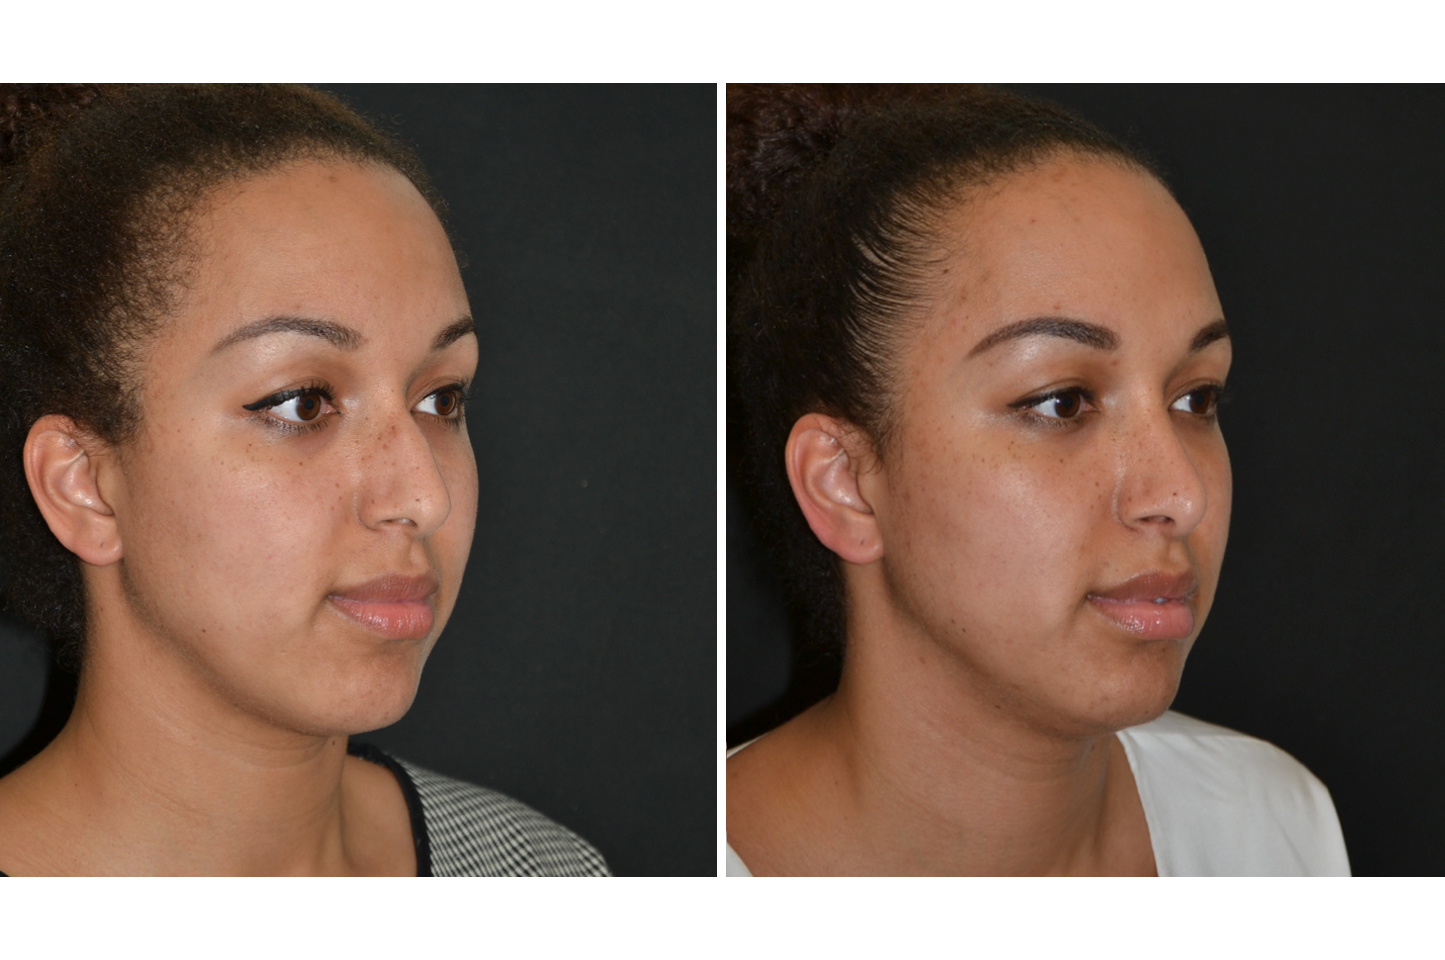 Male rhinoplasty before (left) and after (right), front view